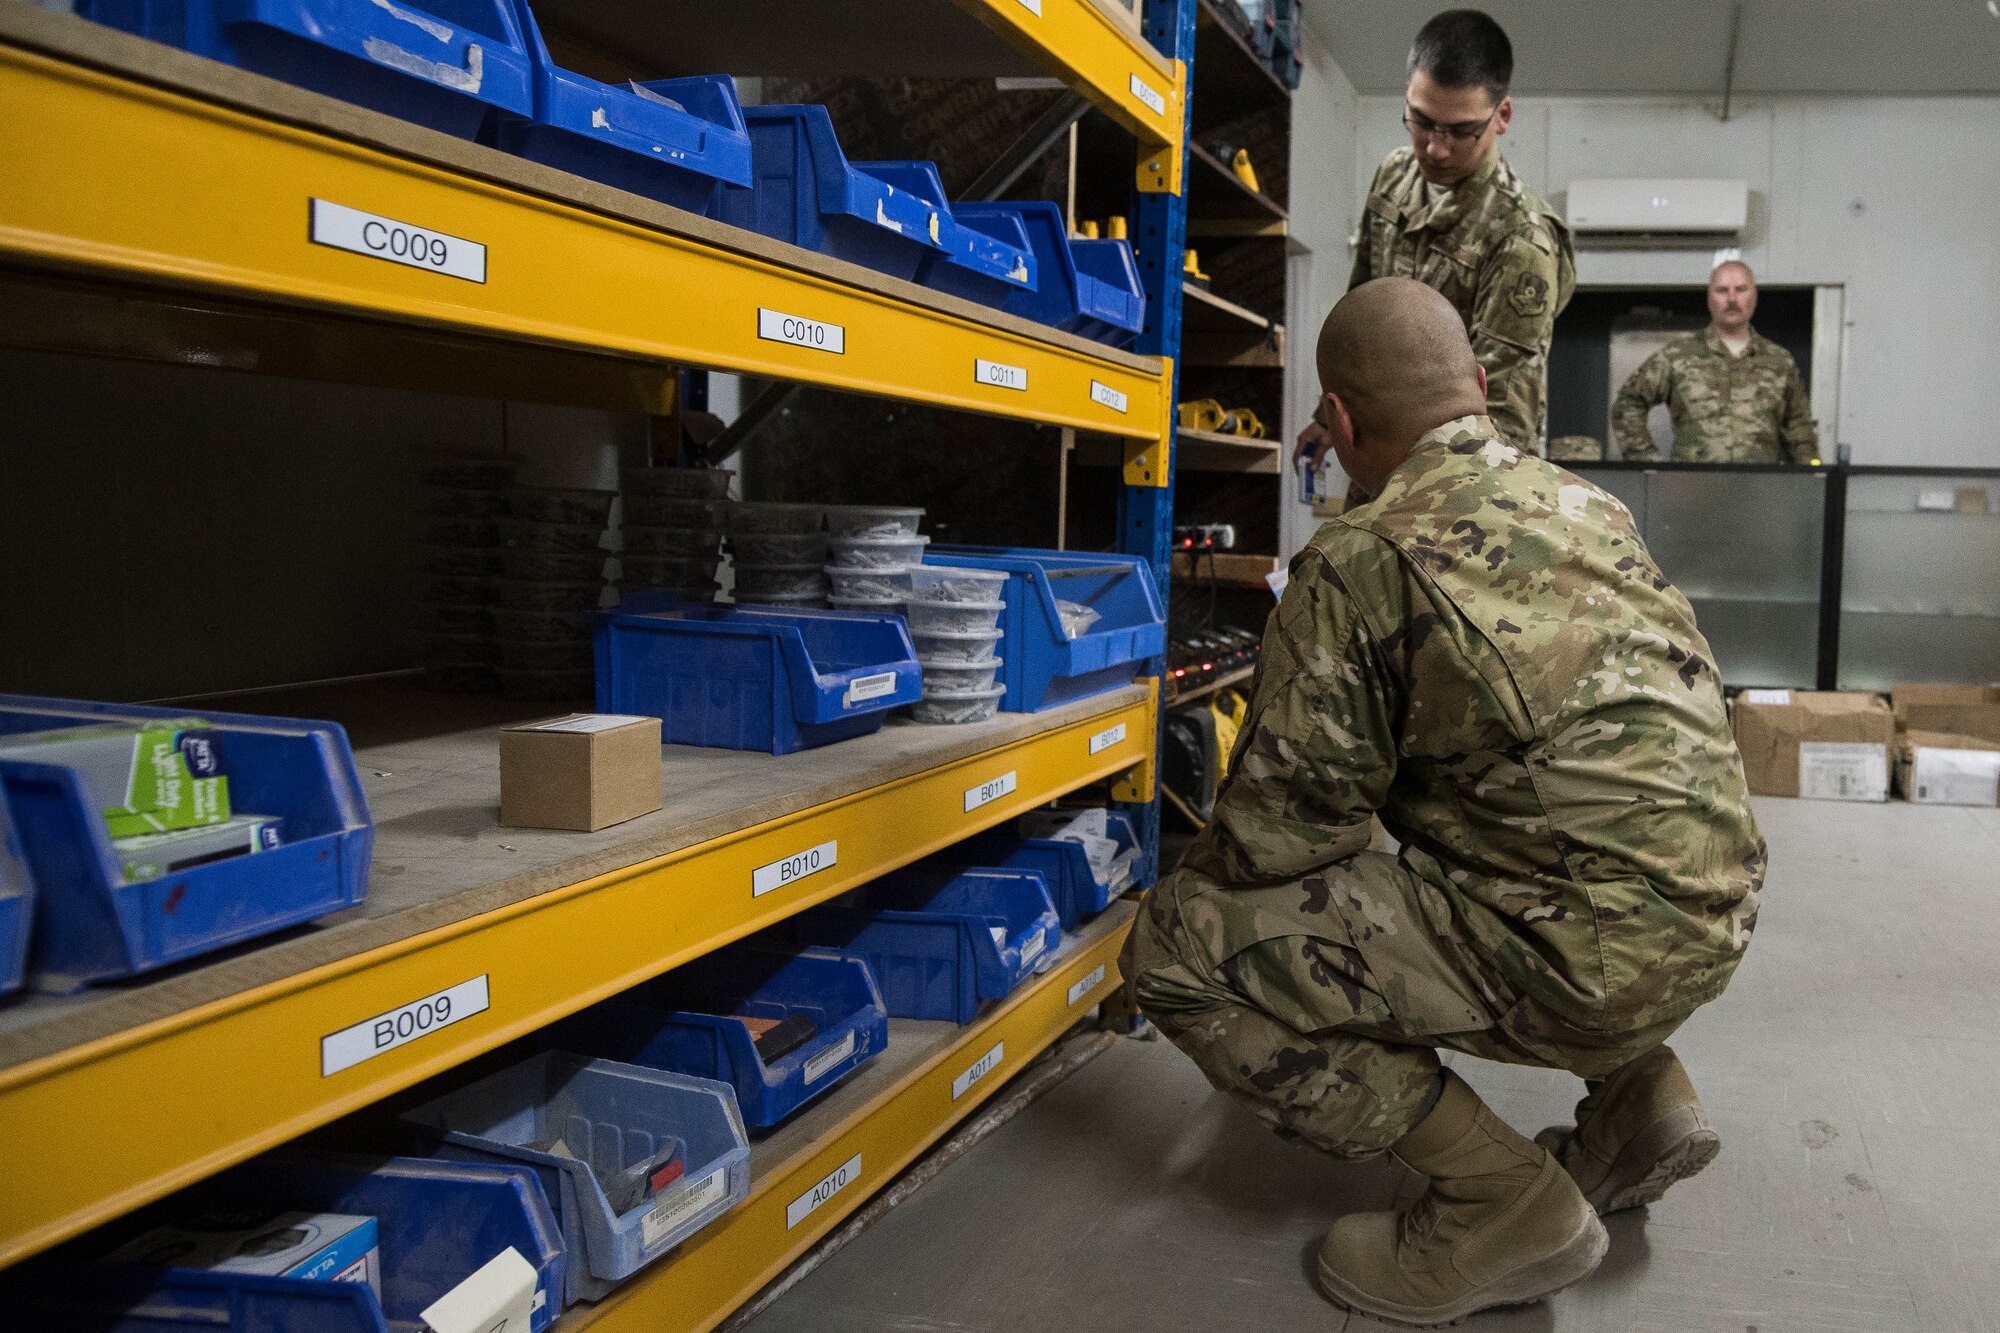 U-Fix-It employees from the 386th Expeditionary Civil Engineer Squadron look for items requrested from a customer at Ali Al Salem Air Base, Kuwait, Sept. 6, 2019. Craftsmen work with the unit resource advisor, talk to outside vendors and submit all requirements gathered to the contracting officer for approval through finance. (U.S. Air Force photo by Senior Airman Lane T. Plummer)